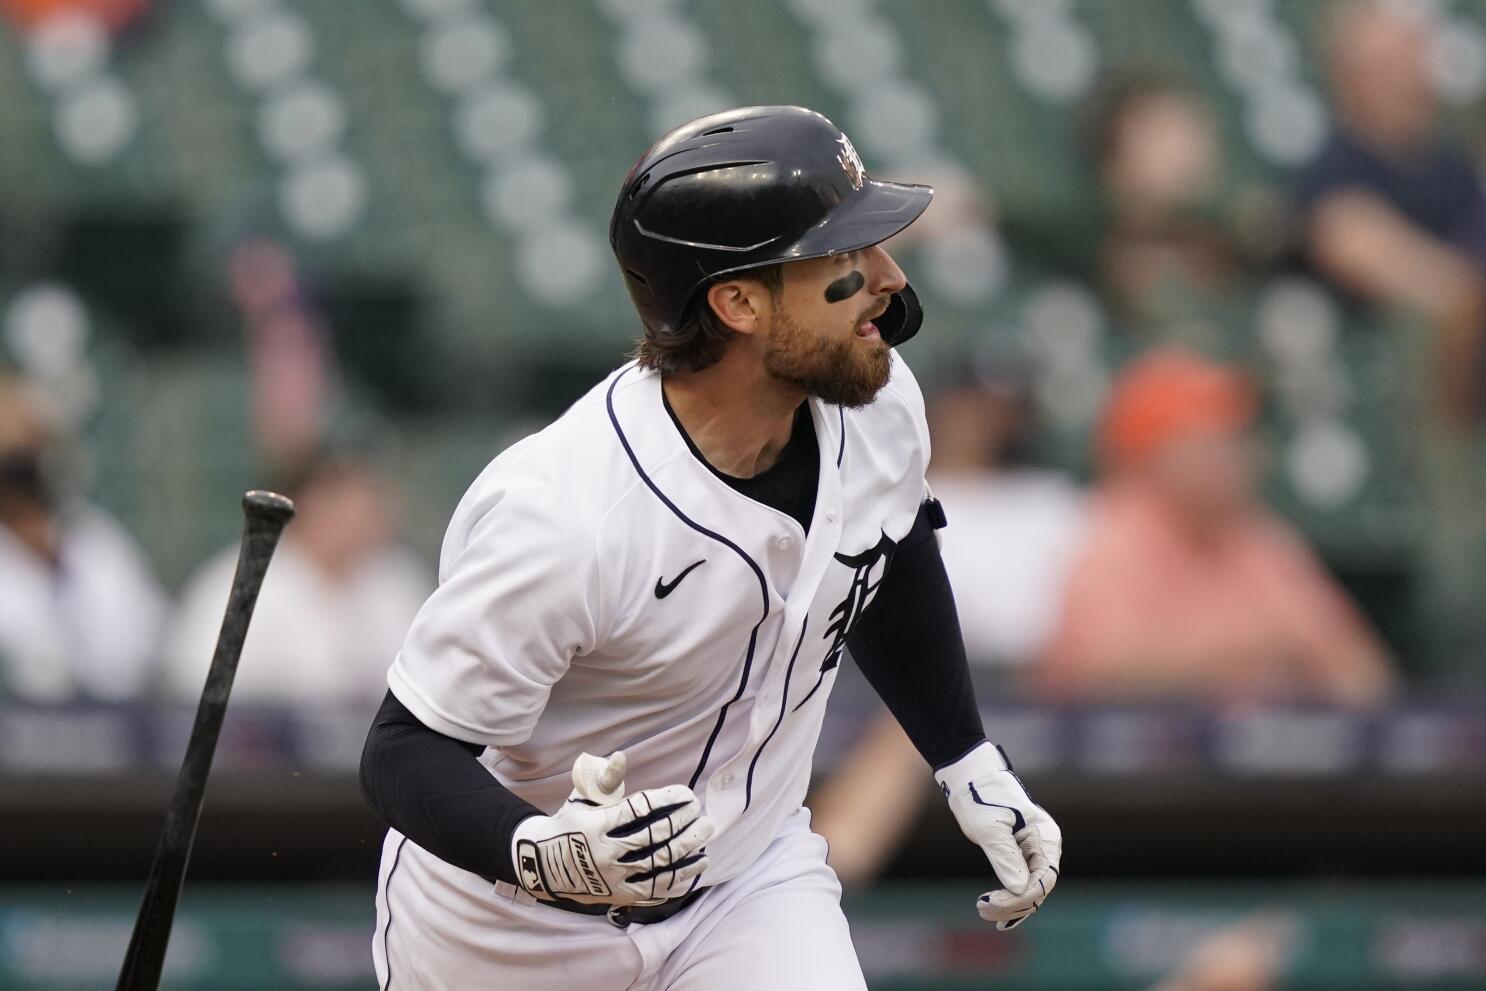 Eric Haase homers in 1st and helps Tigers beat Mariners 5-3 - The